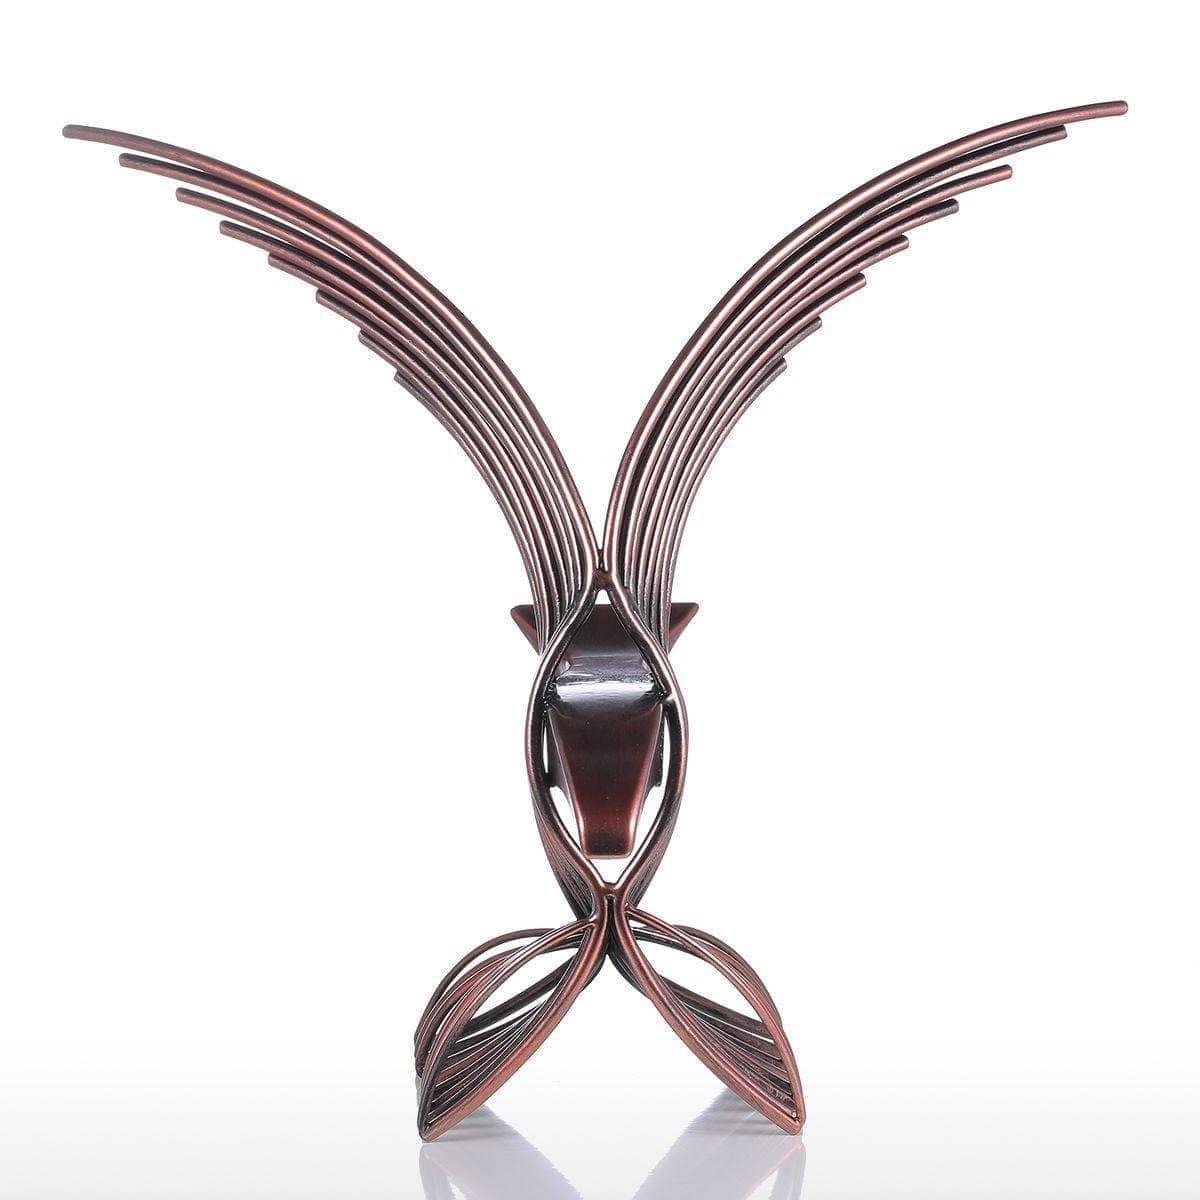 Steel Wings of Freedom: Noble Flying Eagle Sculpture